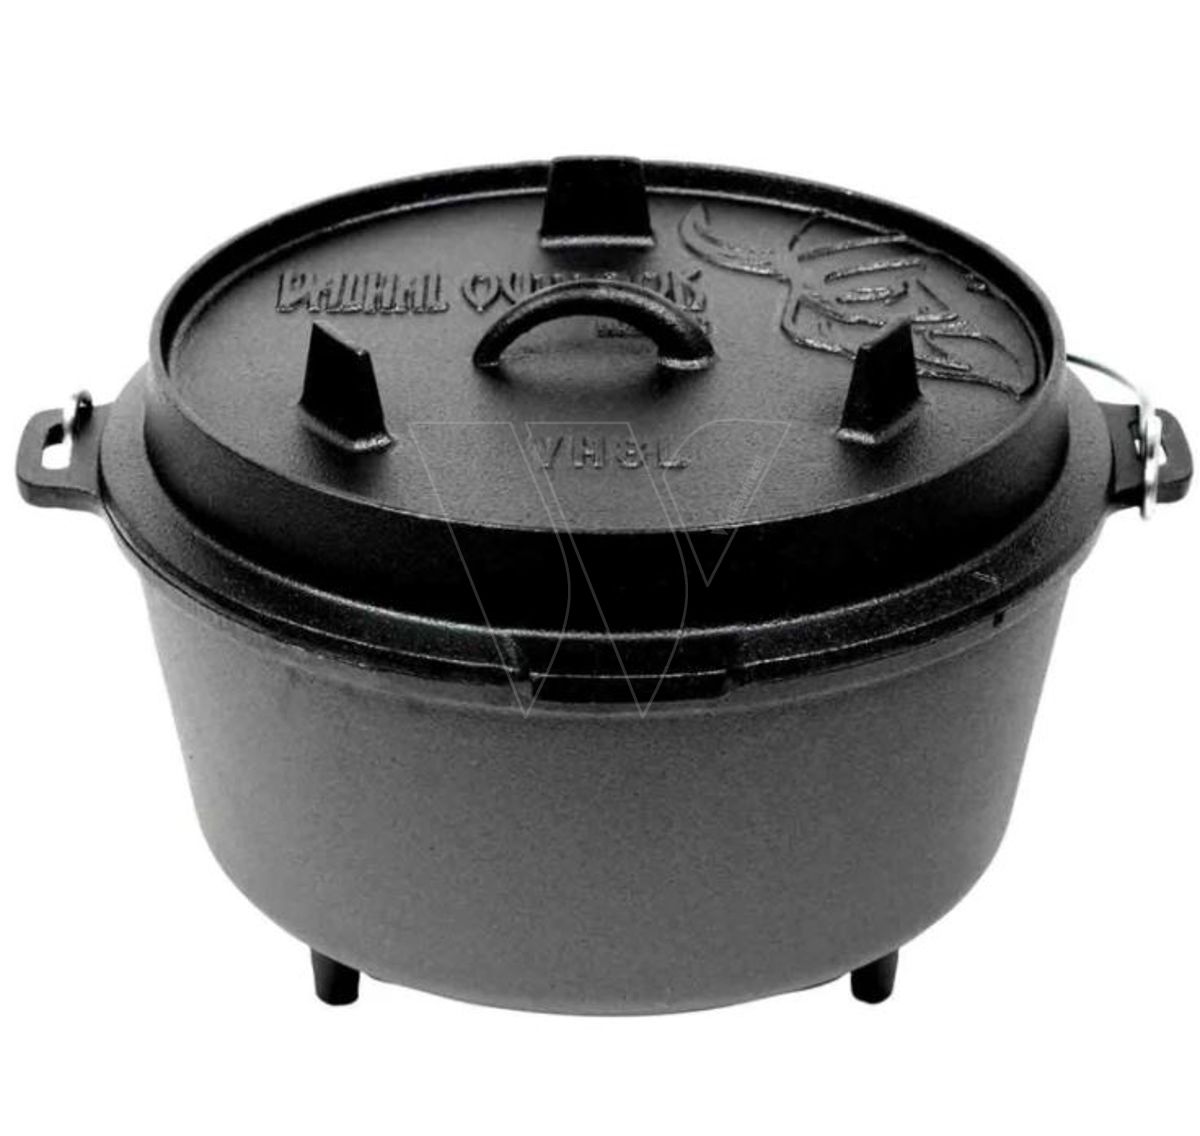 Buy Valhal outdoor dutch oven 12l with stand VH12L+ Wolfswinkel your Valhal  outdoor specialist